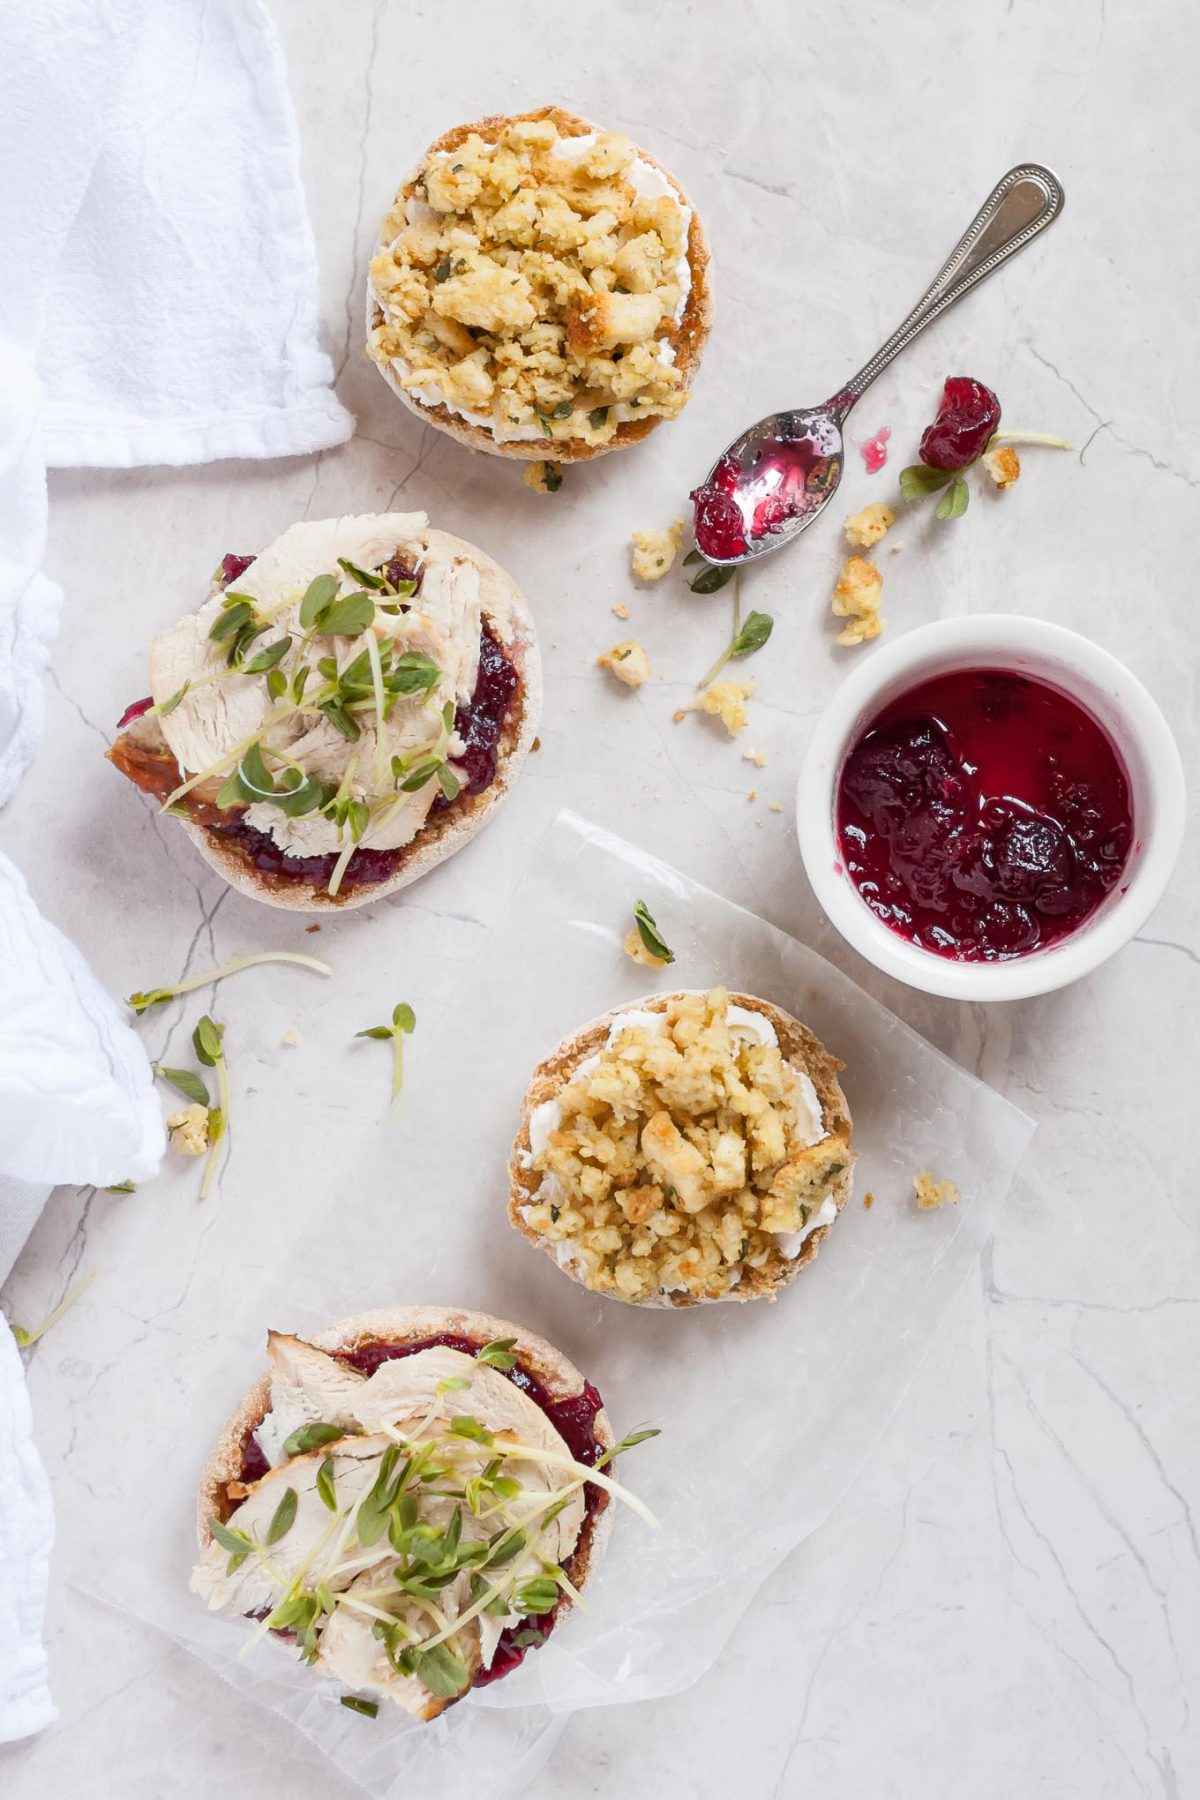 Lighter Thanksgiving Leftover Sandwich with Turkey, Stuffing, and Cranberry Sauce Recipe